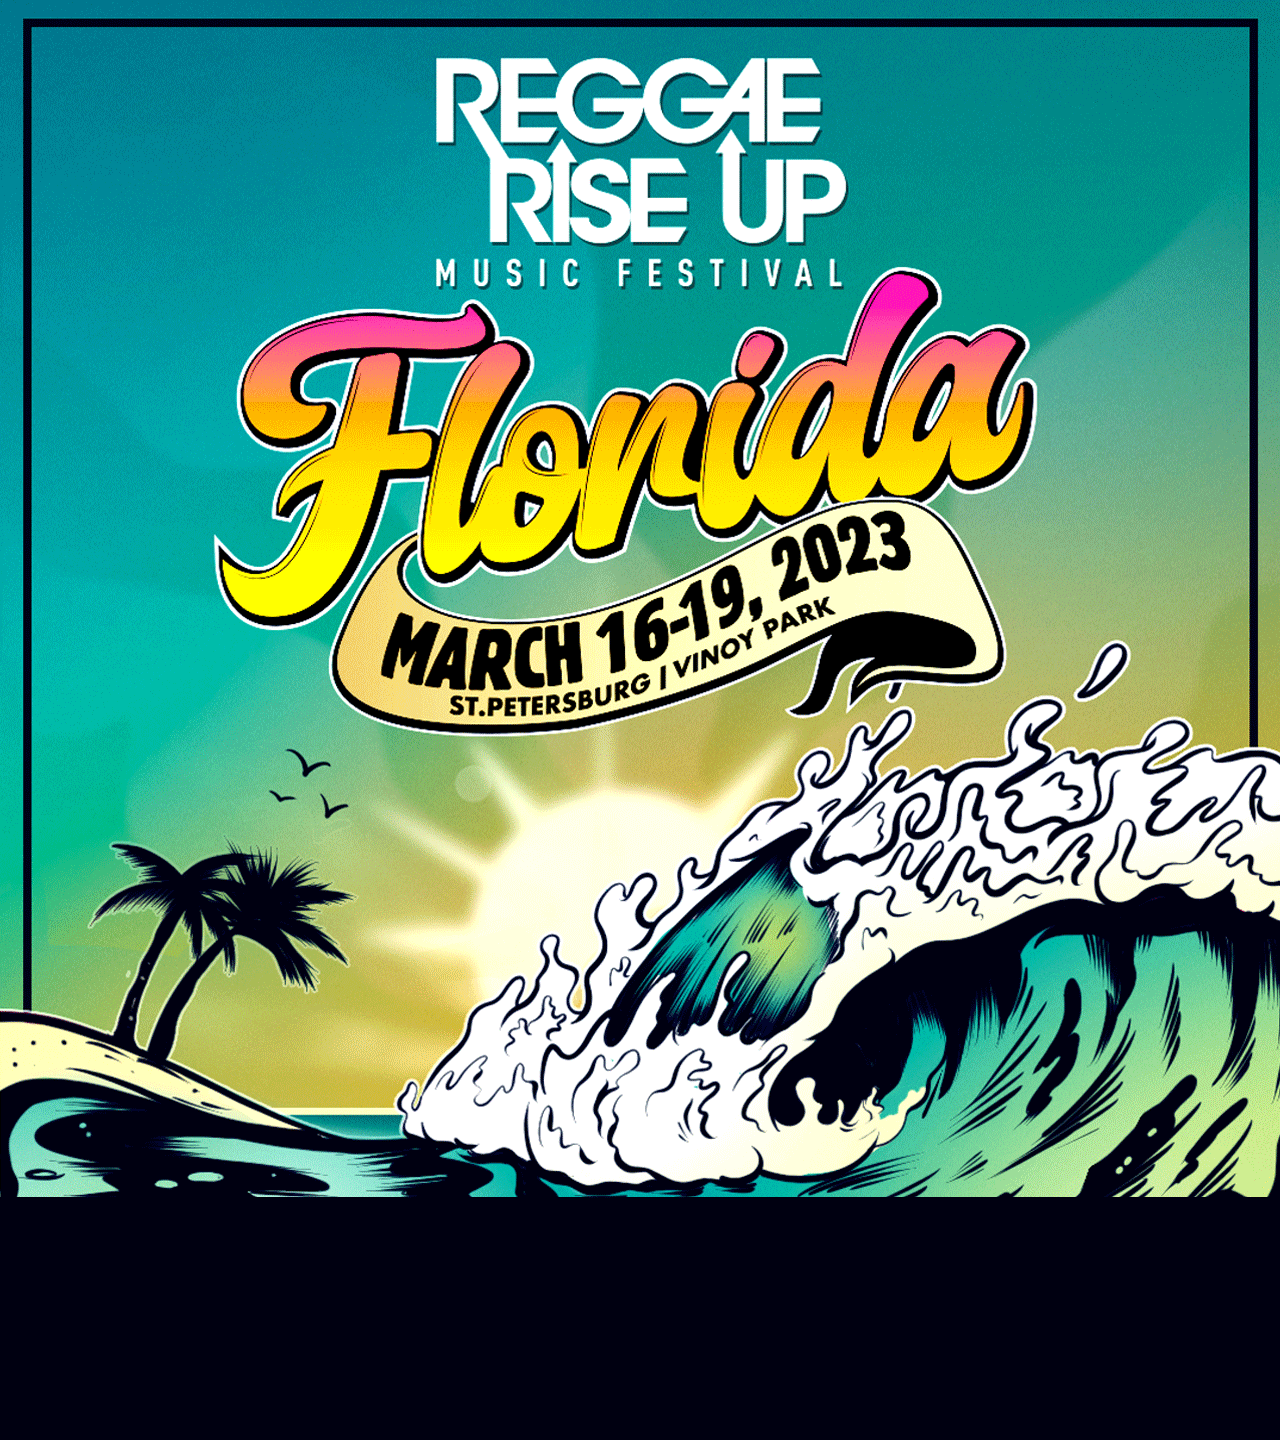 reggae-rise-up-florida-festival-2023-tickets-at-vinoy-park-in-st